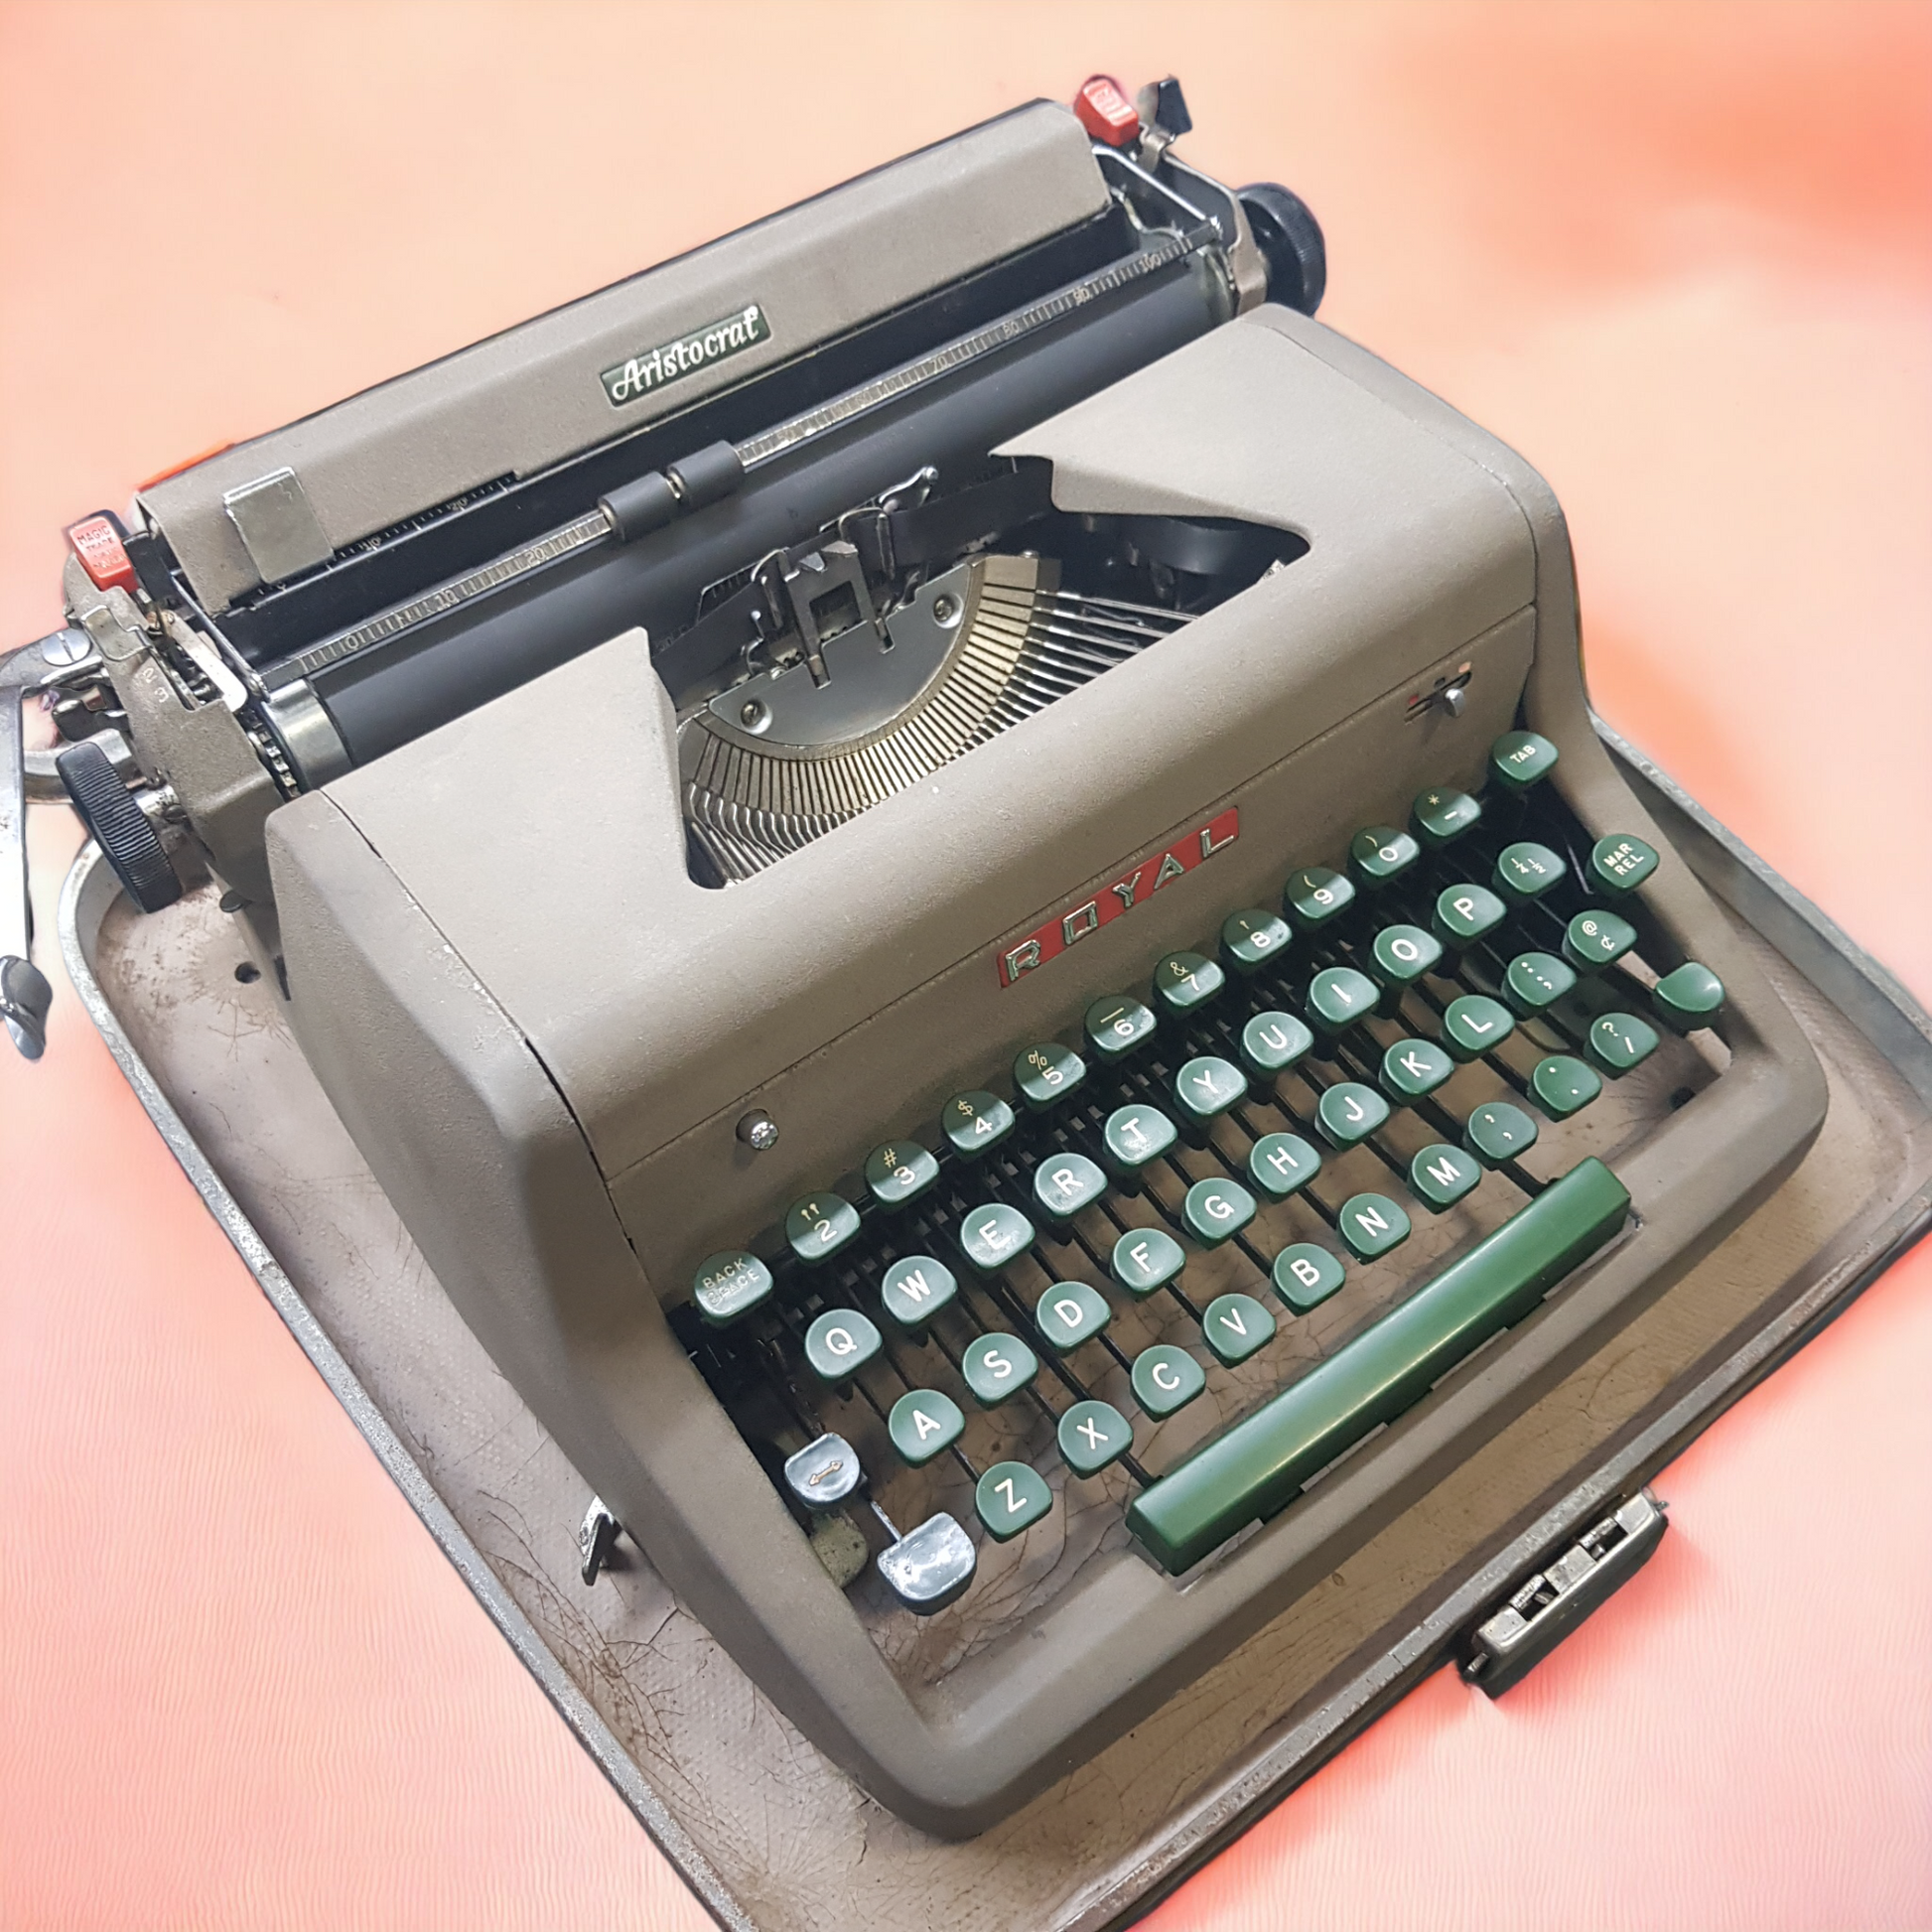 Image of Royal Aristocrat Typewriter. A mid Size Rare Portable Typewriter. Made in the USA. Available from Universal Typewriter Company.